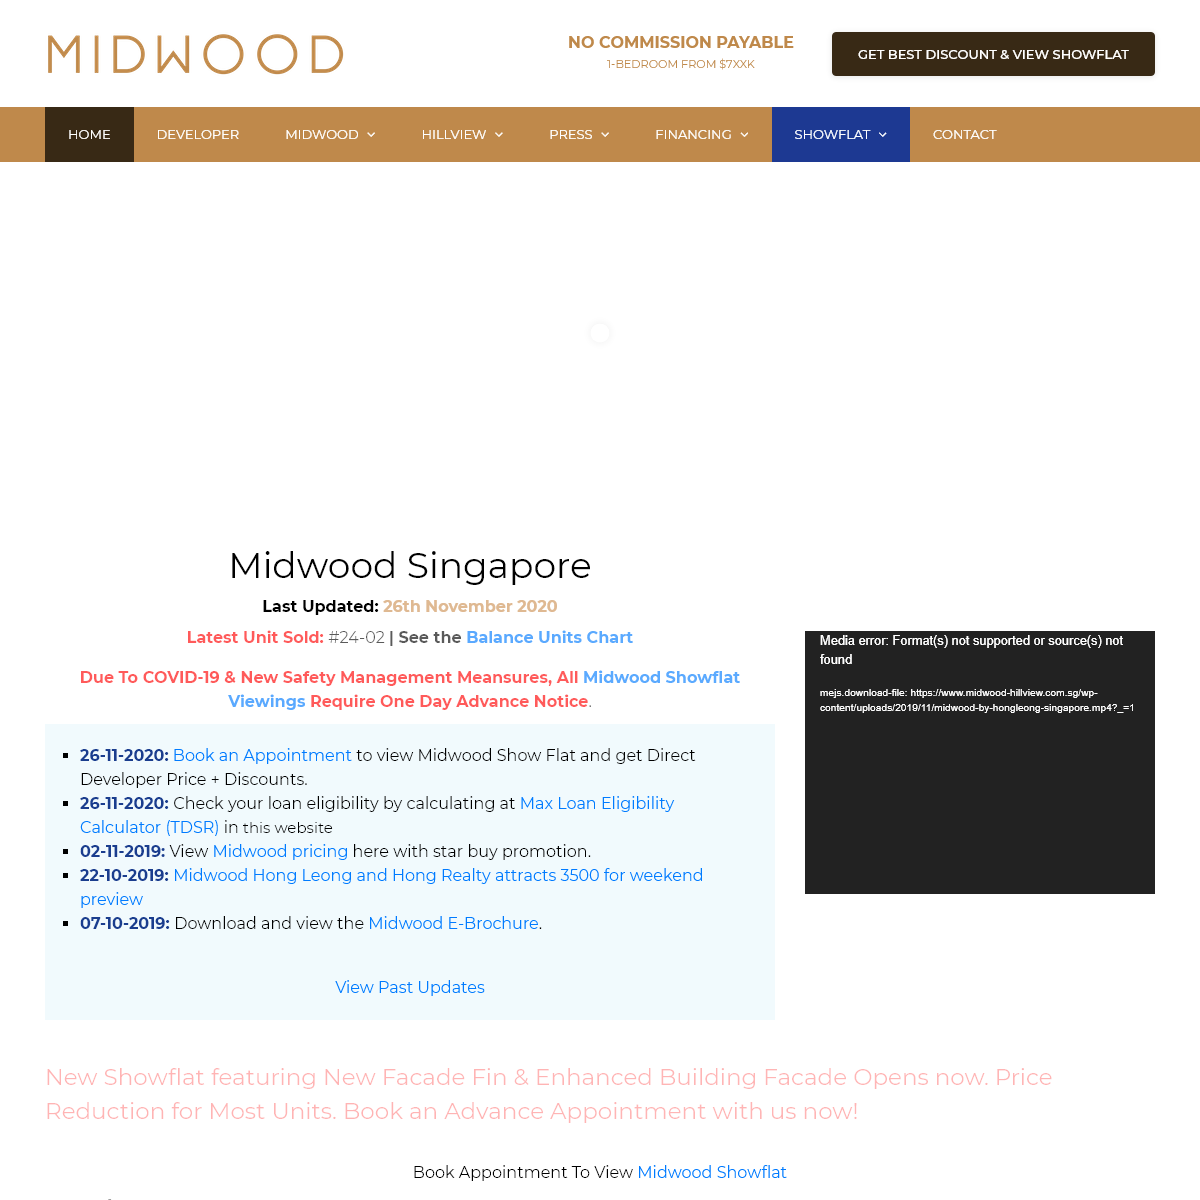 A complete backup of midwood-hillview.com.sg